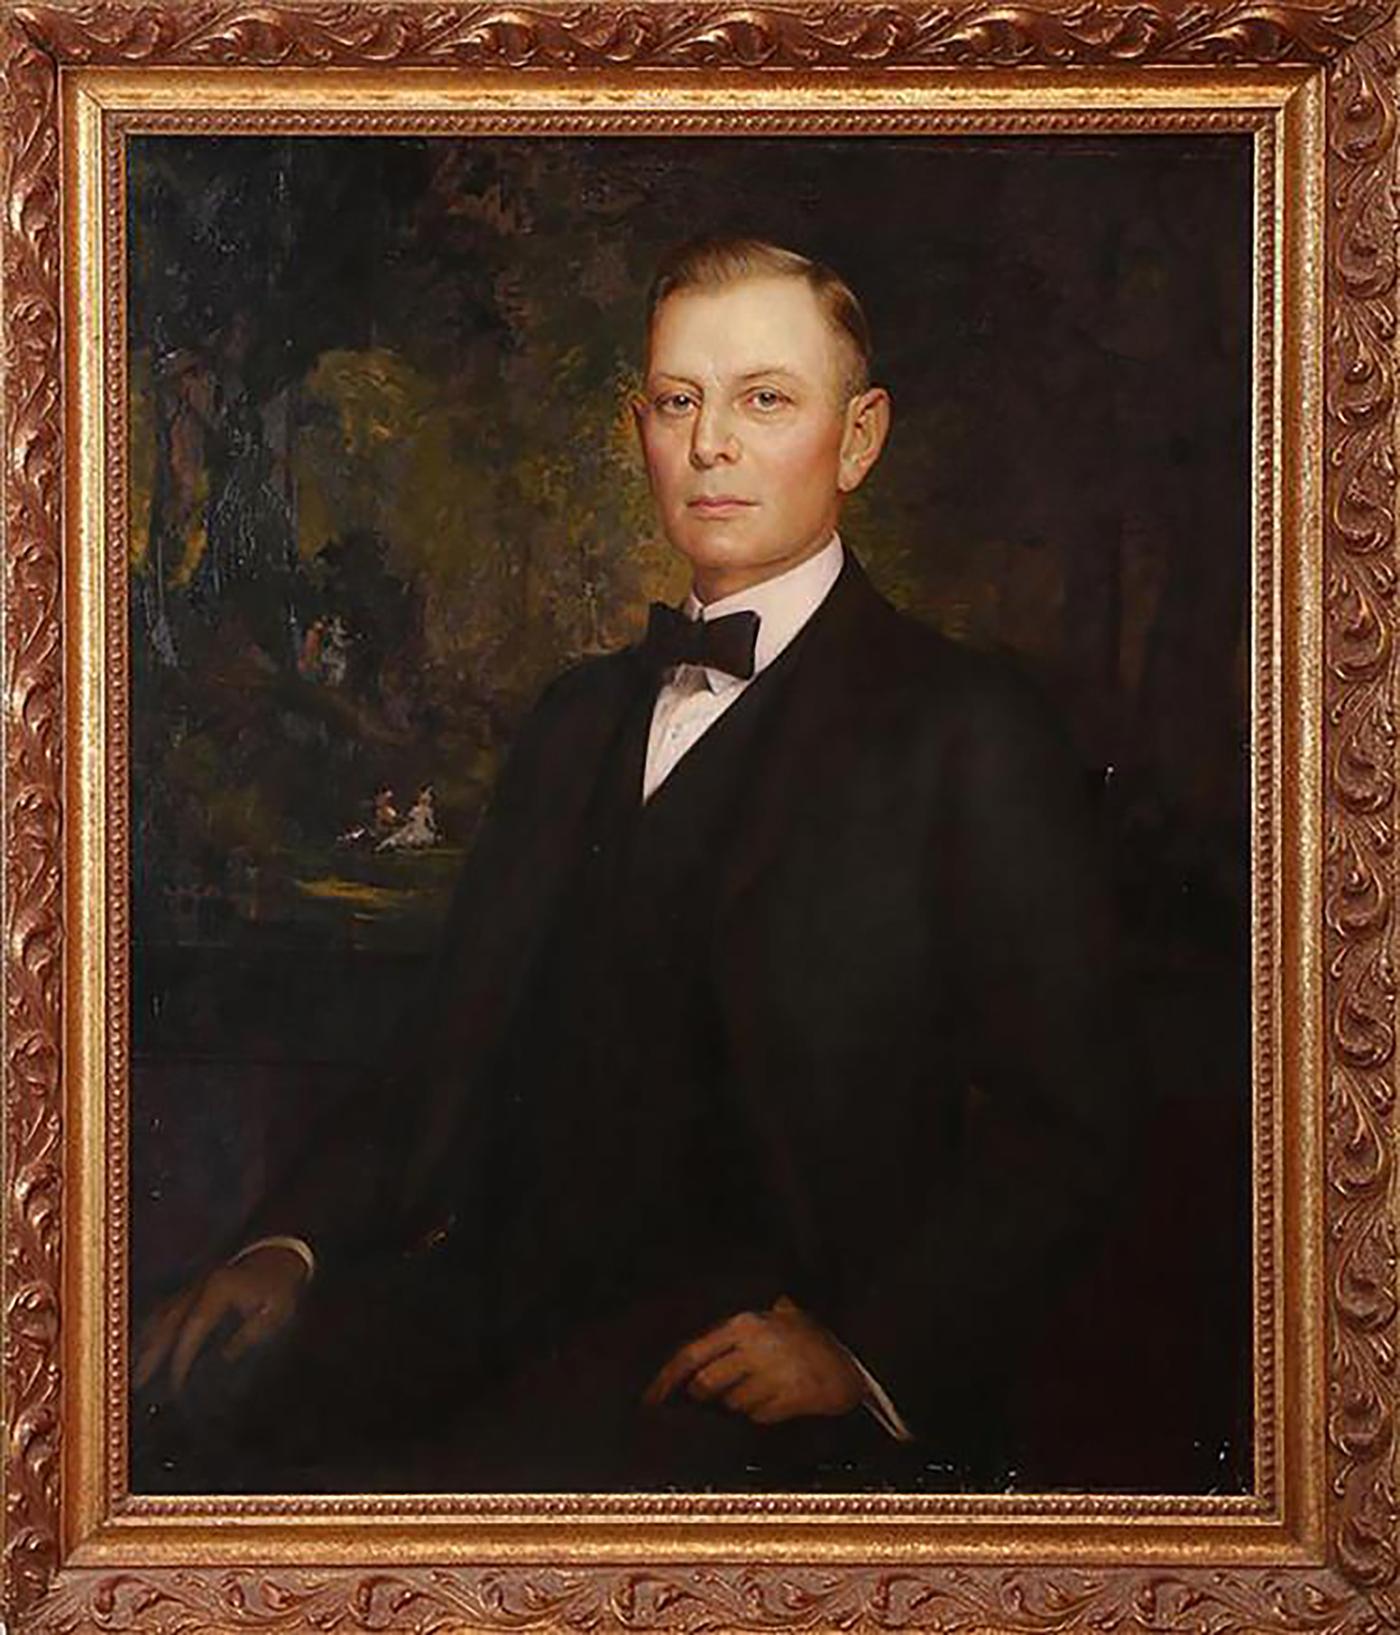 Large Charles Naegele Portrait Oil Painting of a Gentleman  Charles Naegele (American Artist, 1857 Knoxville, TN - 1944), Entitled "Portrait of a Gentleman"  oil on canvas  signed by the artist in the lower right  overall (with frame): 42.5"h x